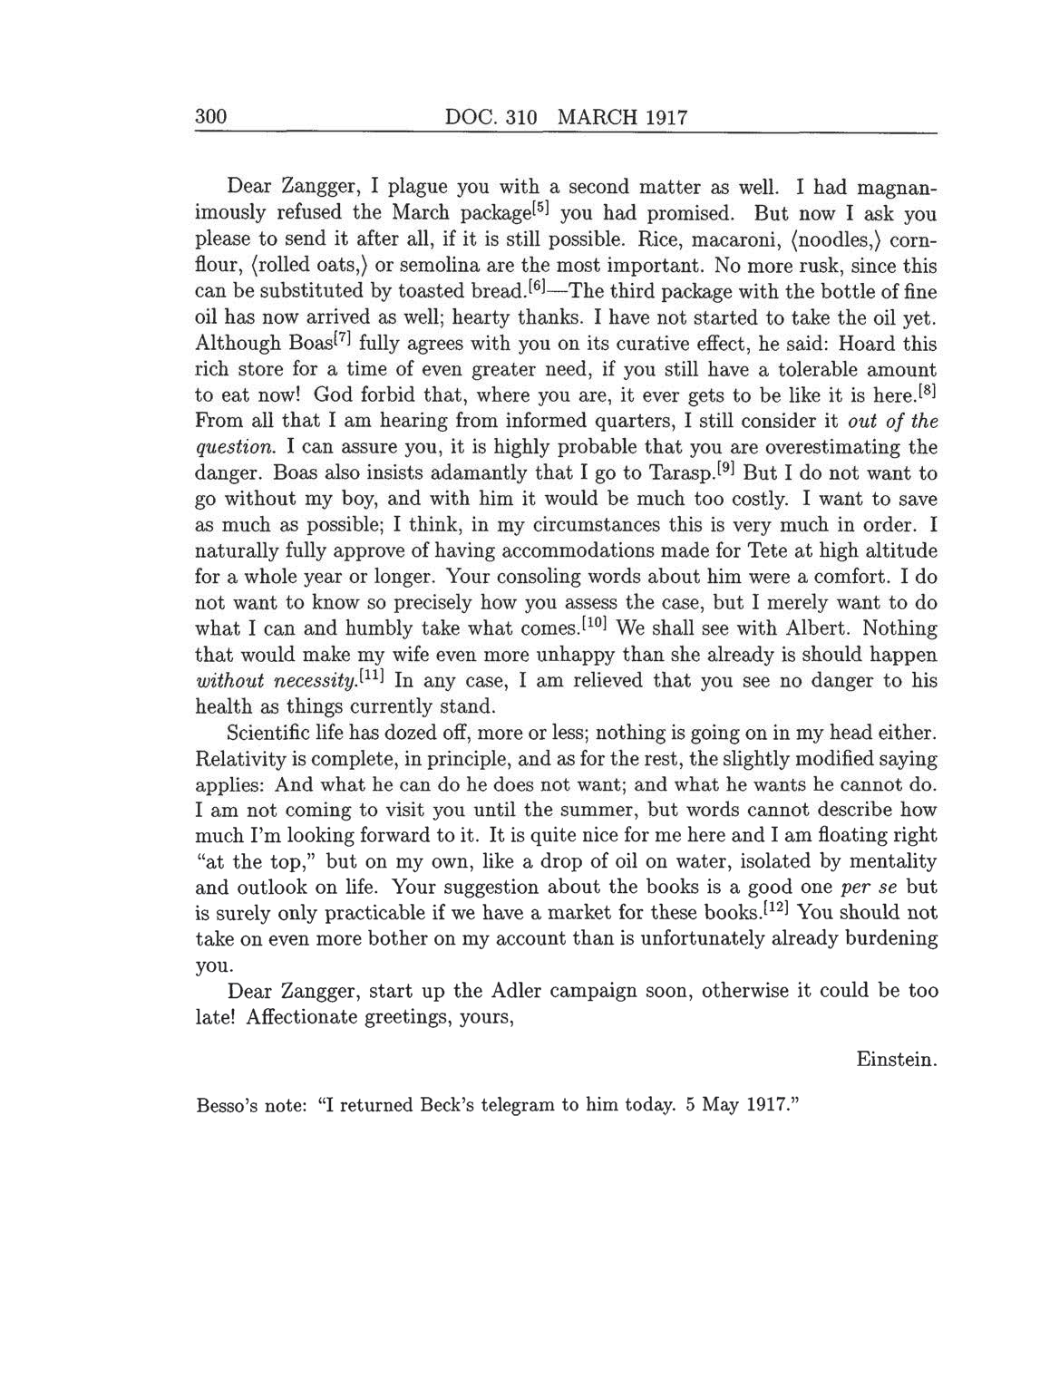 Volume 8: The Berlin Years: Correspondence, 1914-1918 (English translation supplement) page 300